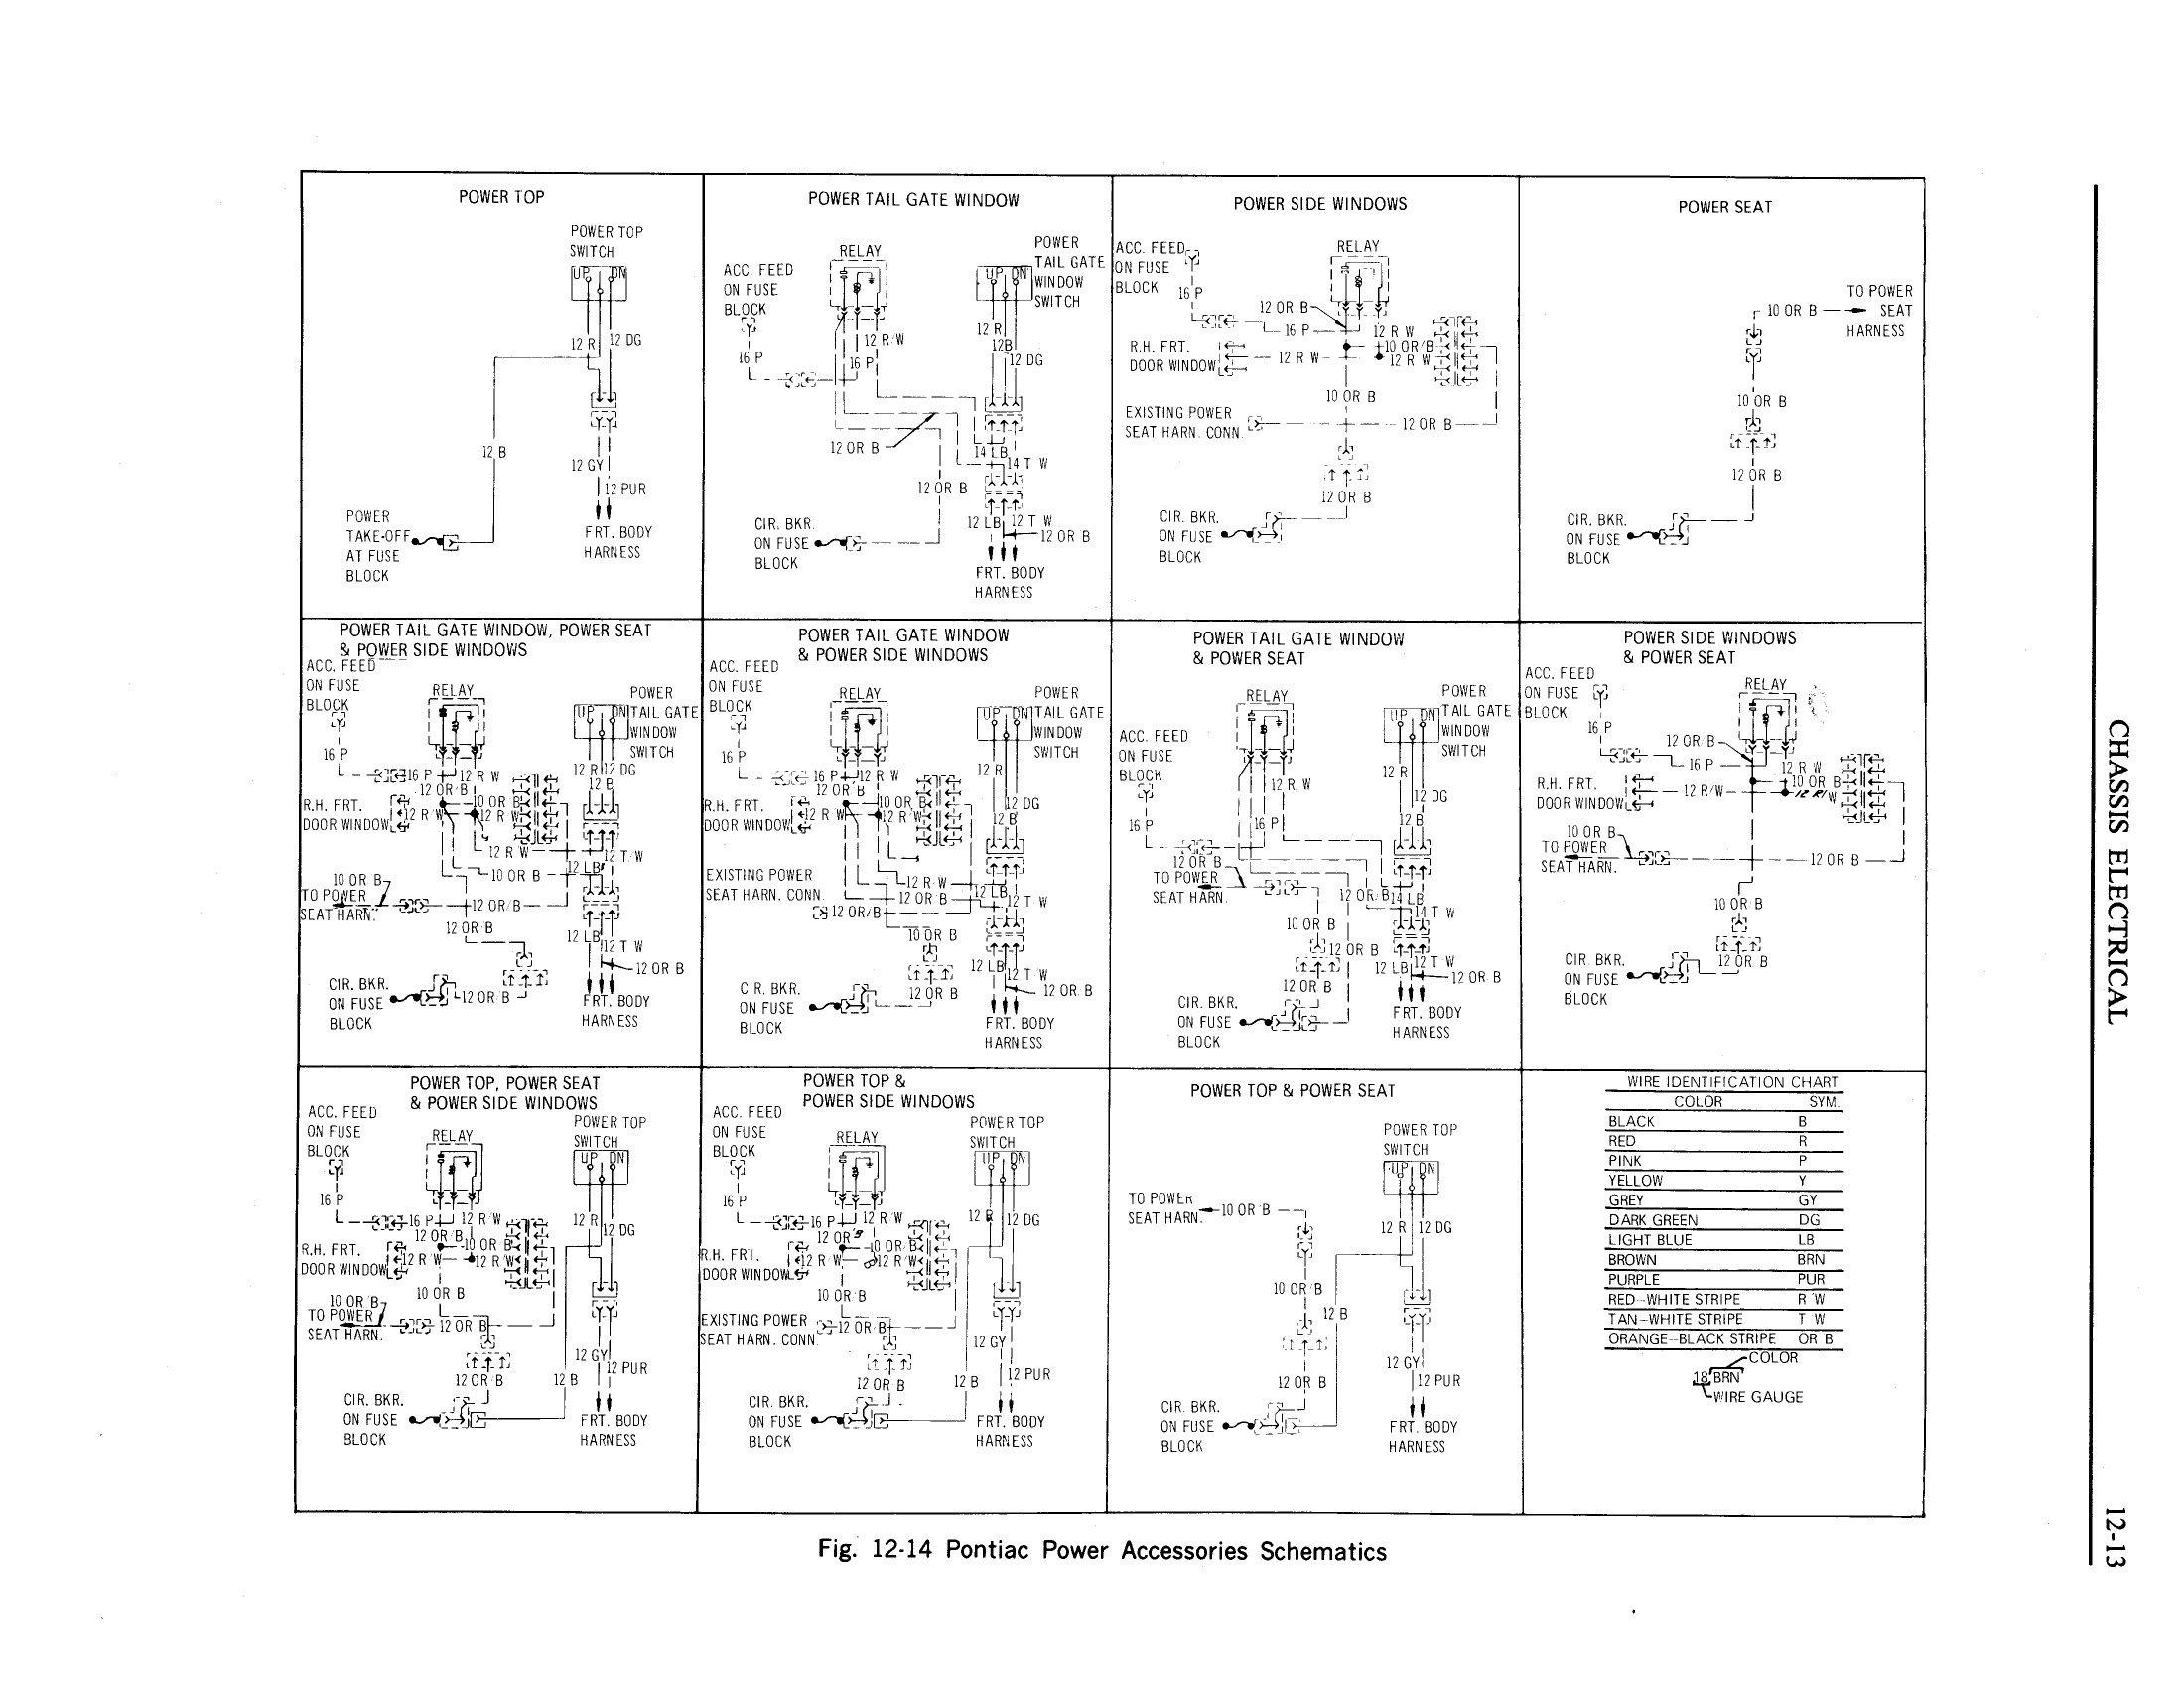 1970 Pontiac Chassis Service Manual - Chassis Electrical Page 13 of 67